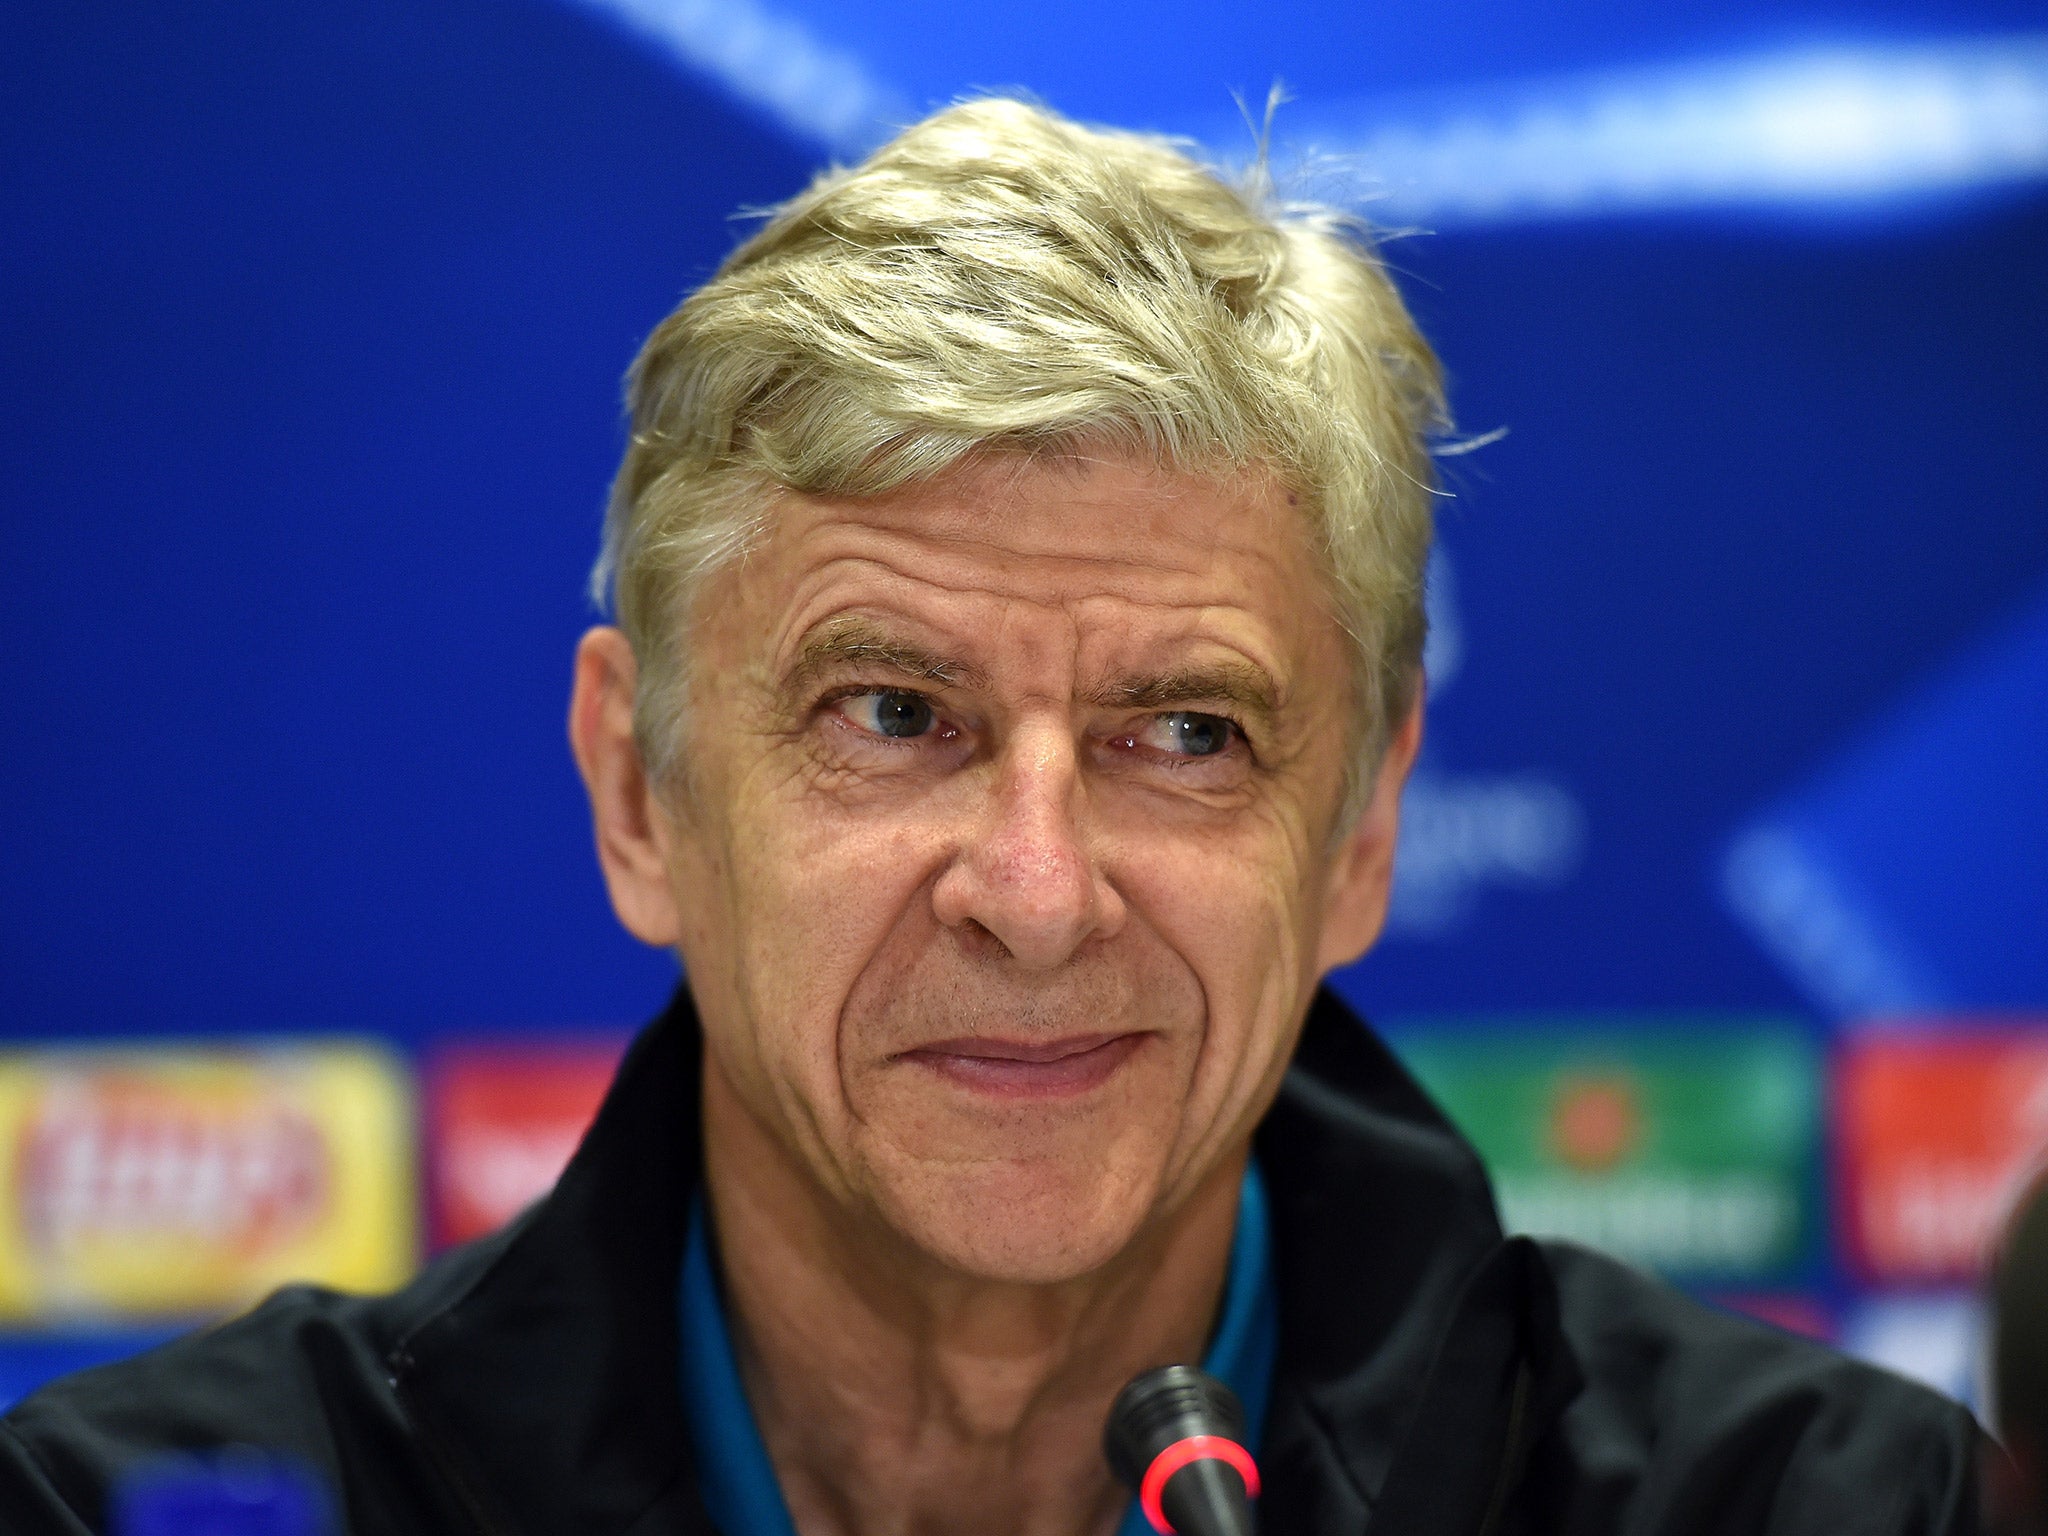 Arsenal have finished inside the top four in each of Arsene Wenger's 20 years in charge